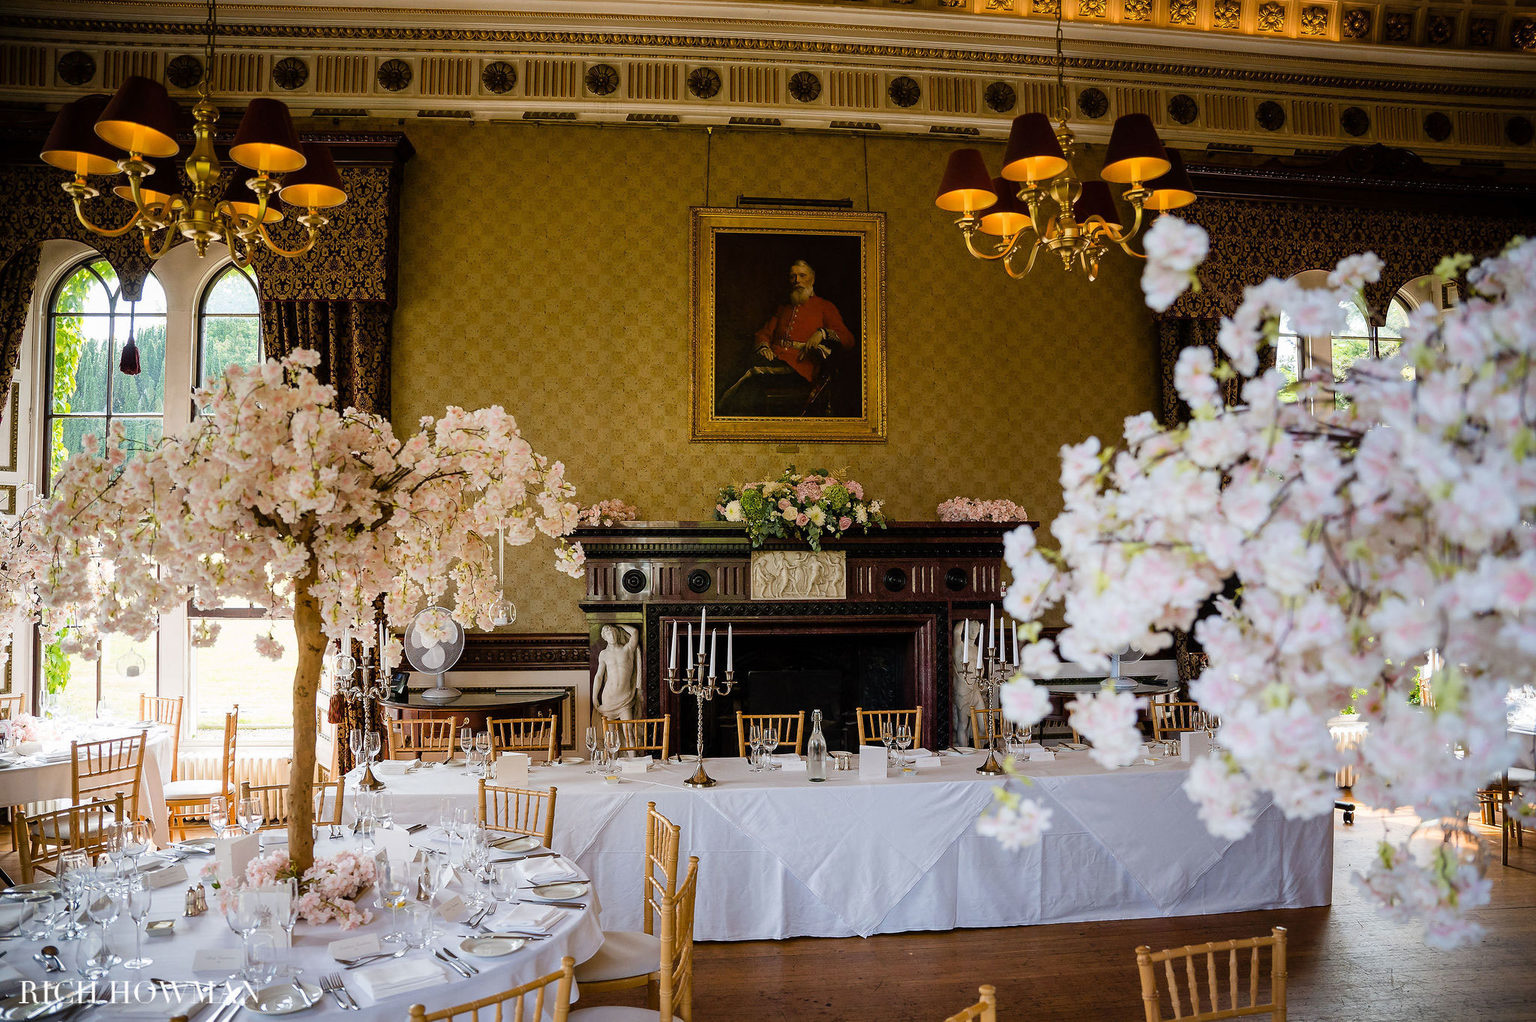 Samuel's Restaurant set up for a castle wedding reception, with a top table, at the Swinton Estate near Harrogate and the Yorkshire Dales. Photo by Rich Howman.